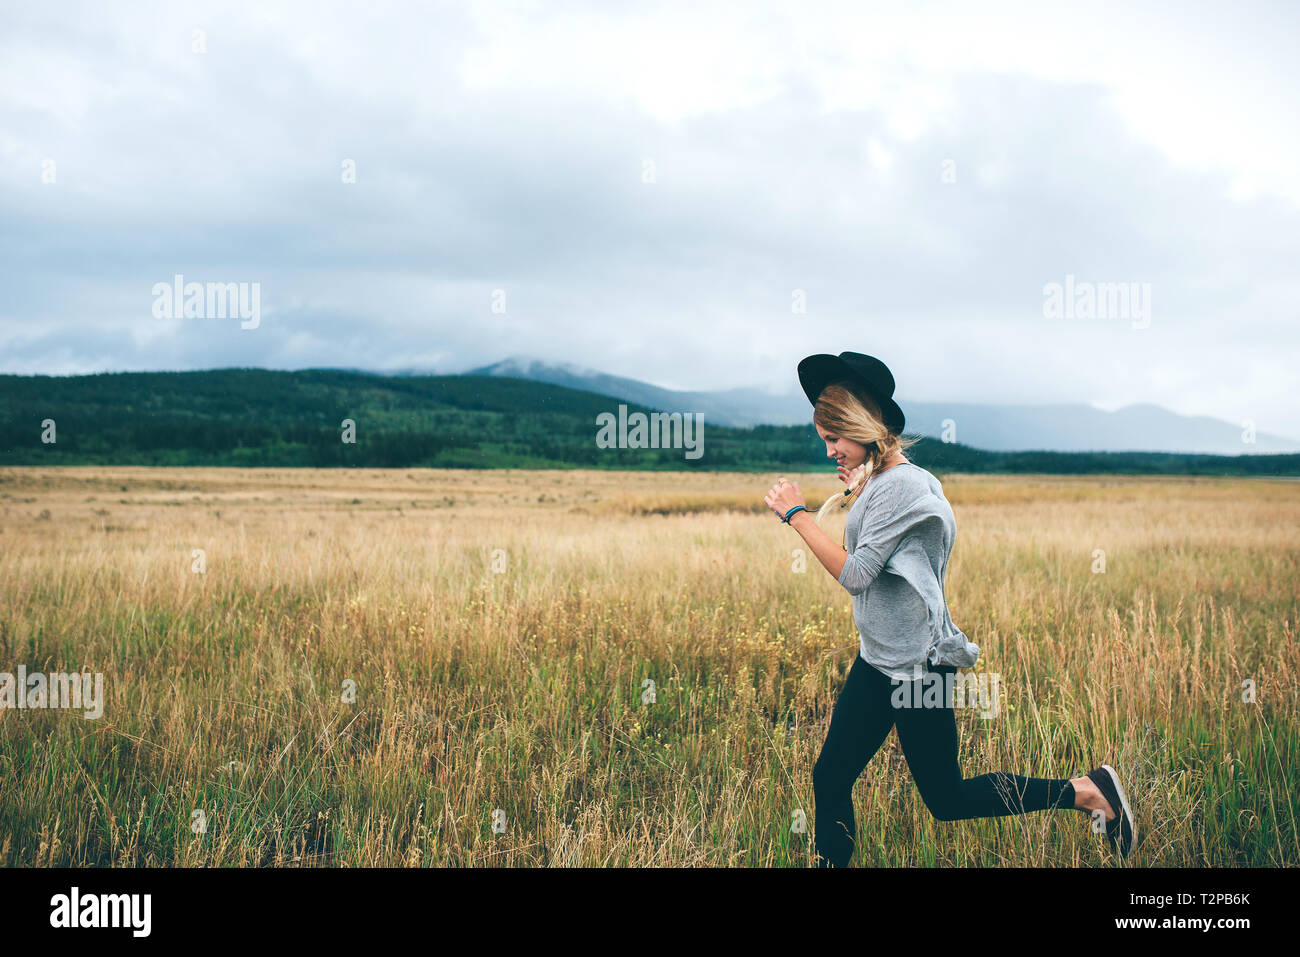 Woman running in wheat field, Edmonton, Canada Banque D'Images